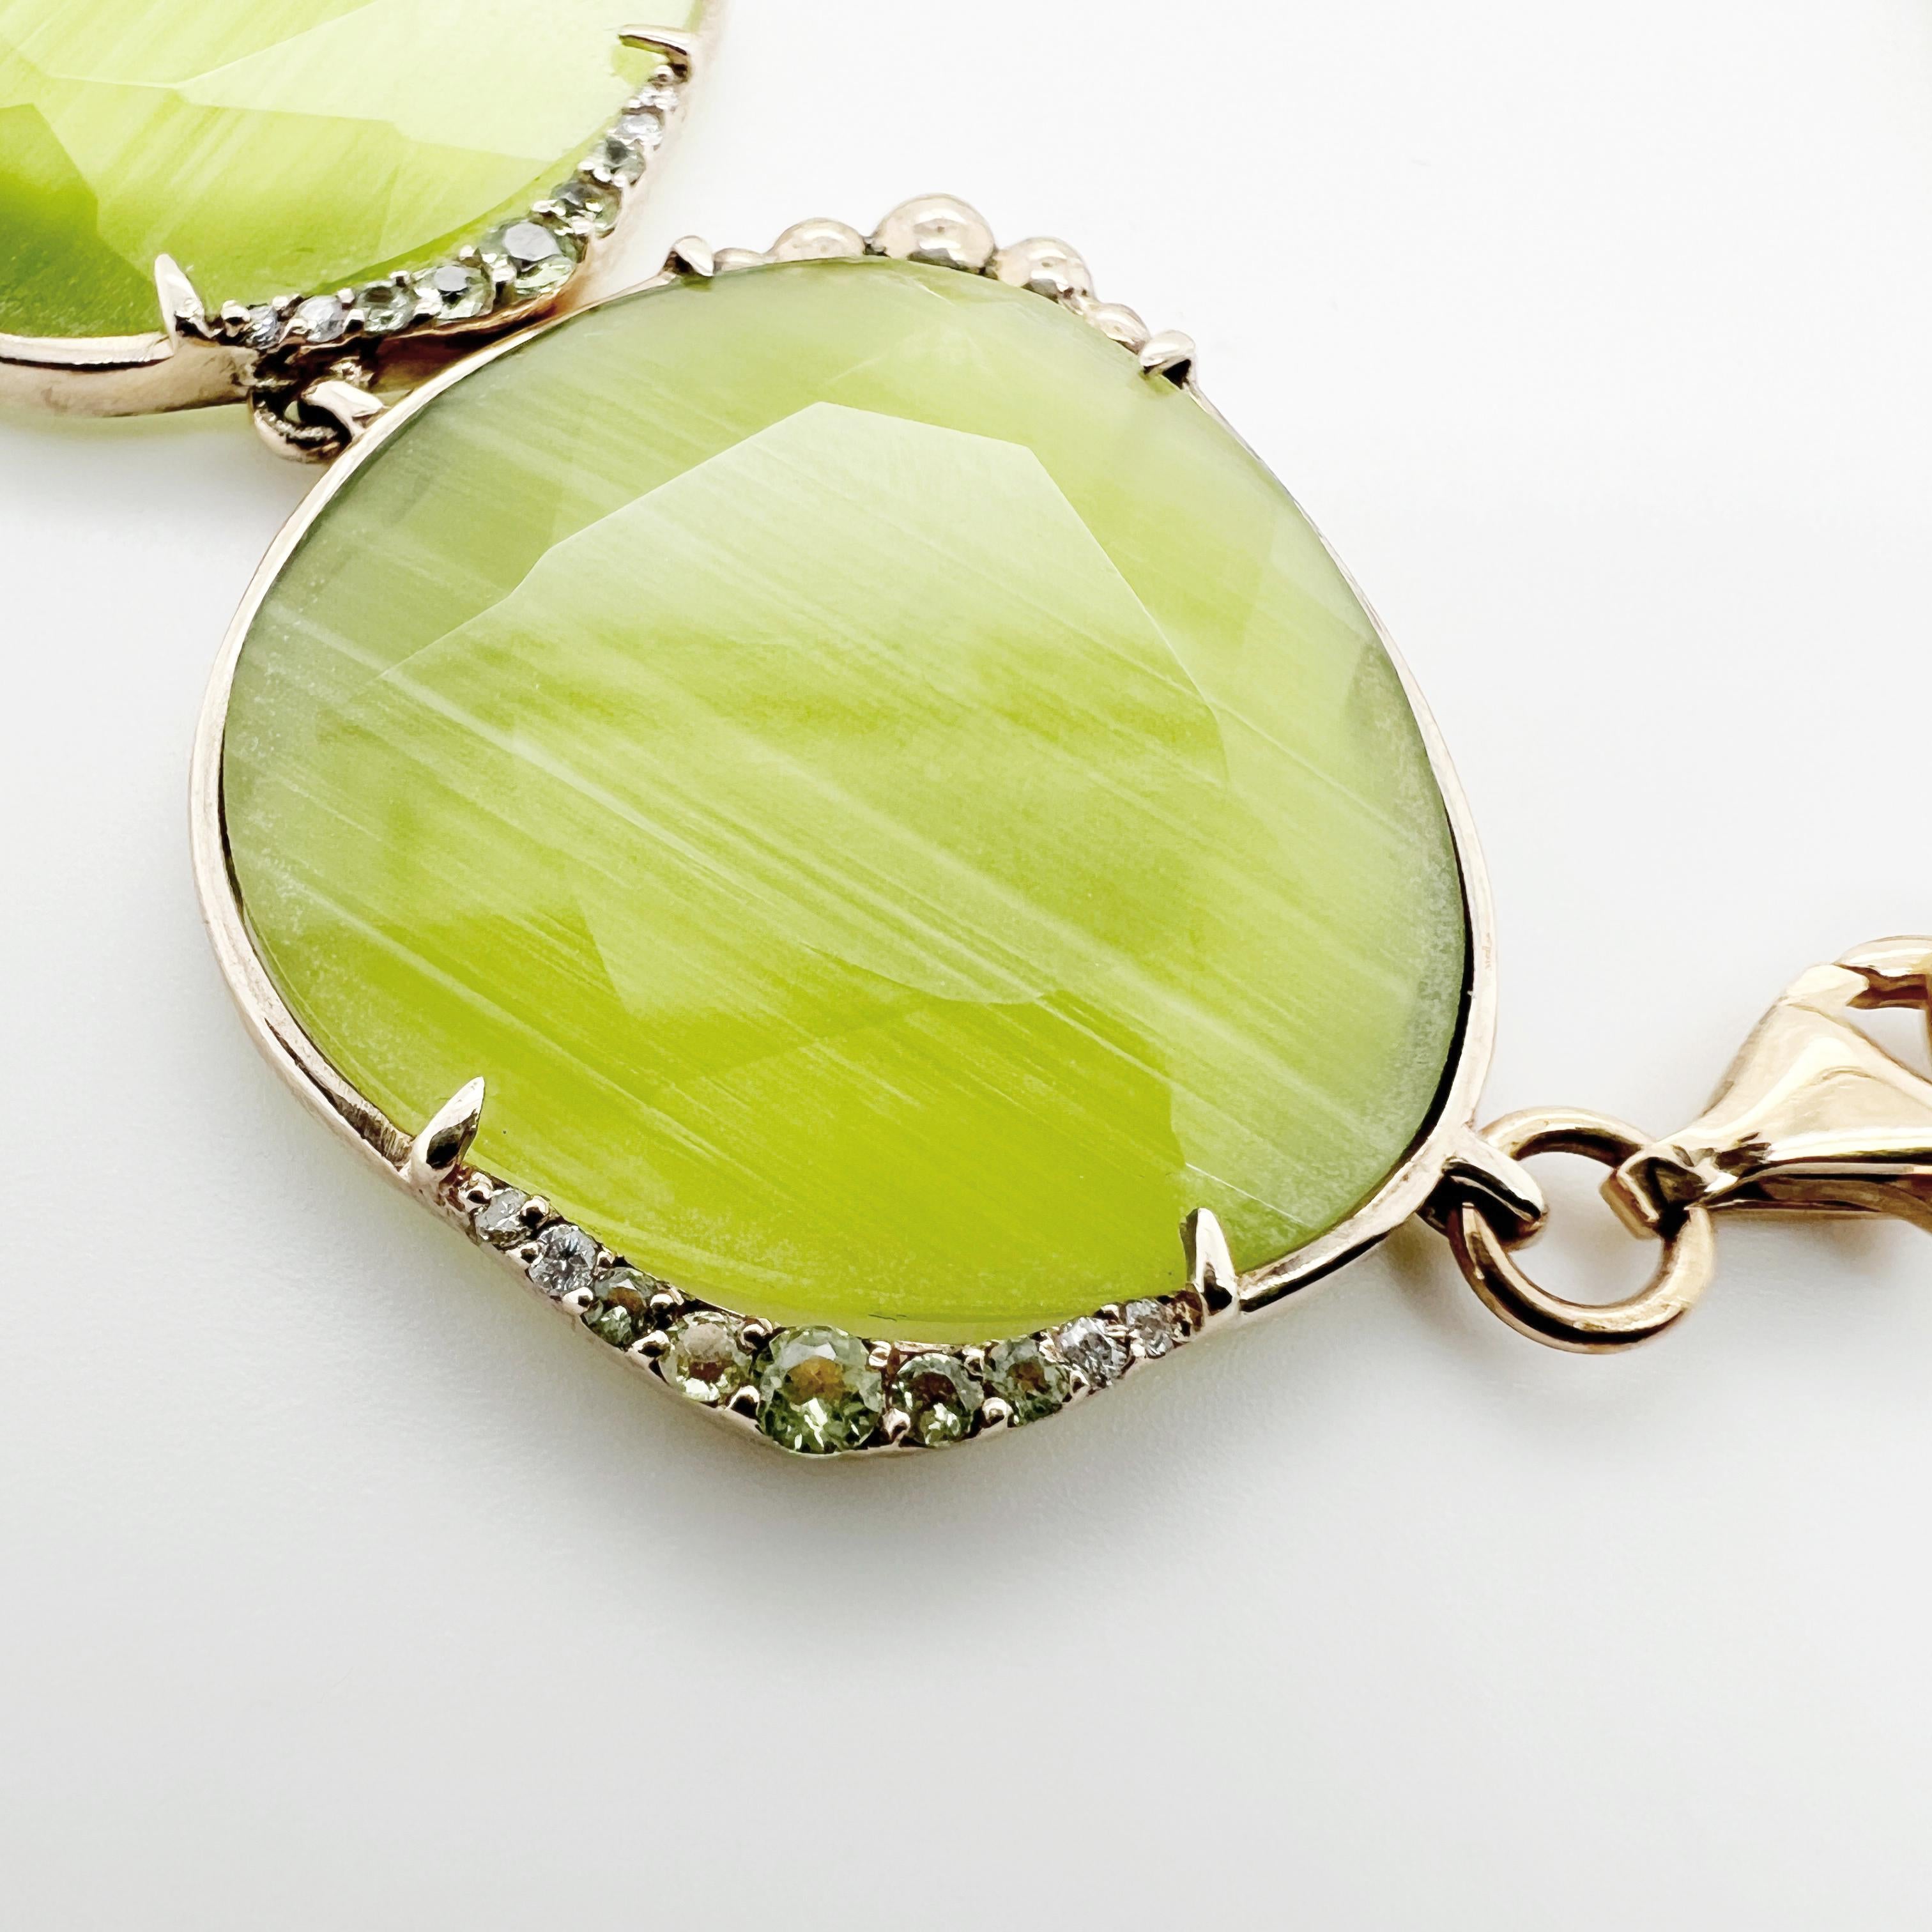 The Optic Chic Collection bracelet is a unique piece crafted using only the finest materials. It features a 9kt gold body with white natural diamonds, doublets of Optic Fiber & Rock crystal & green peridots . The green optic fiber and rock crystal